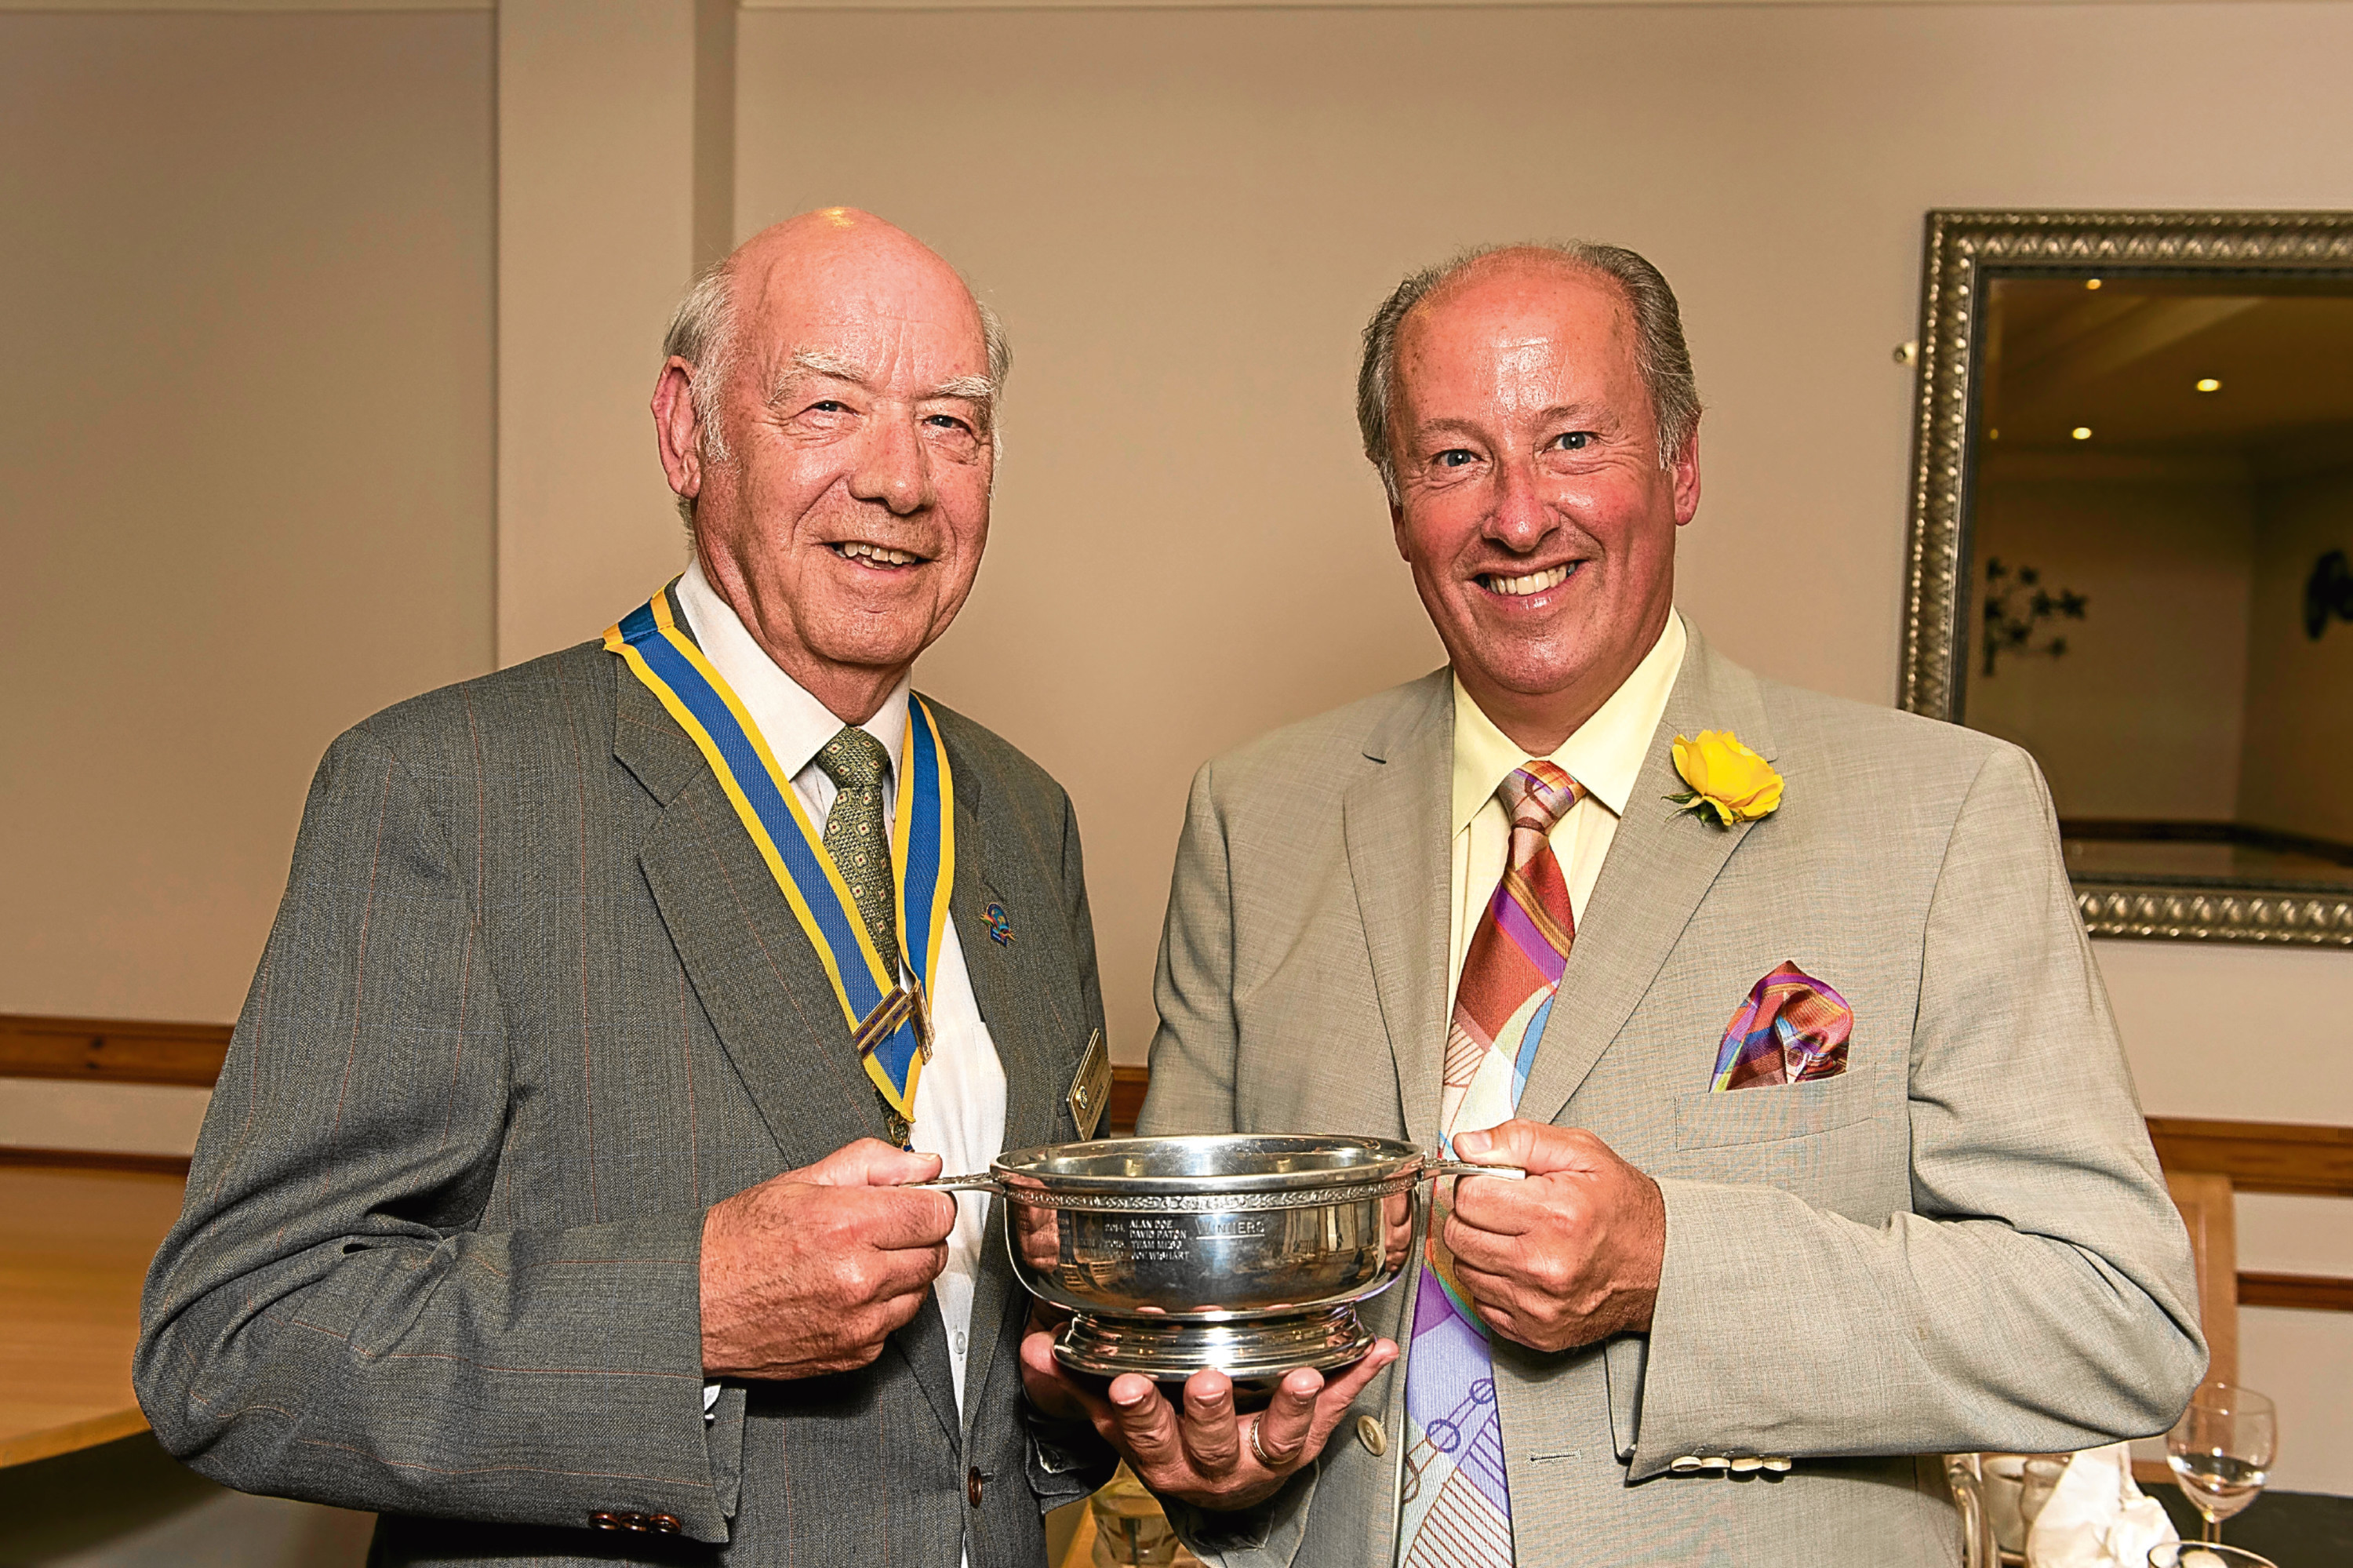 Joe Wishart (right) with outgoing Rotary President Tony Rance handing over the trophy.